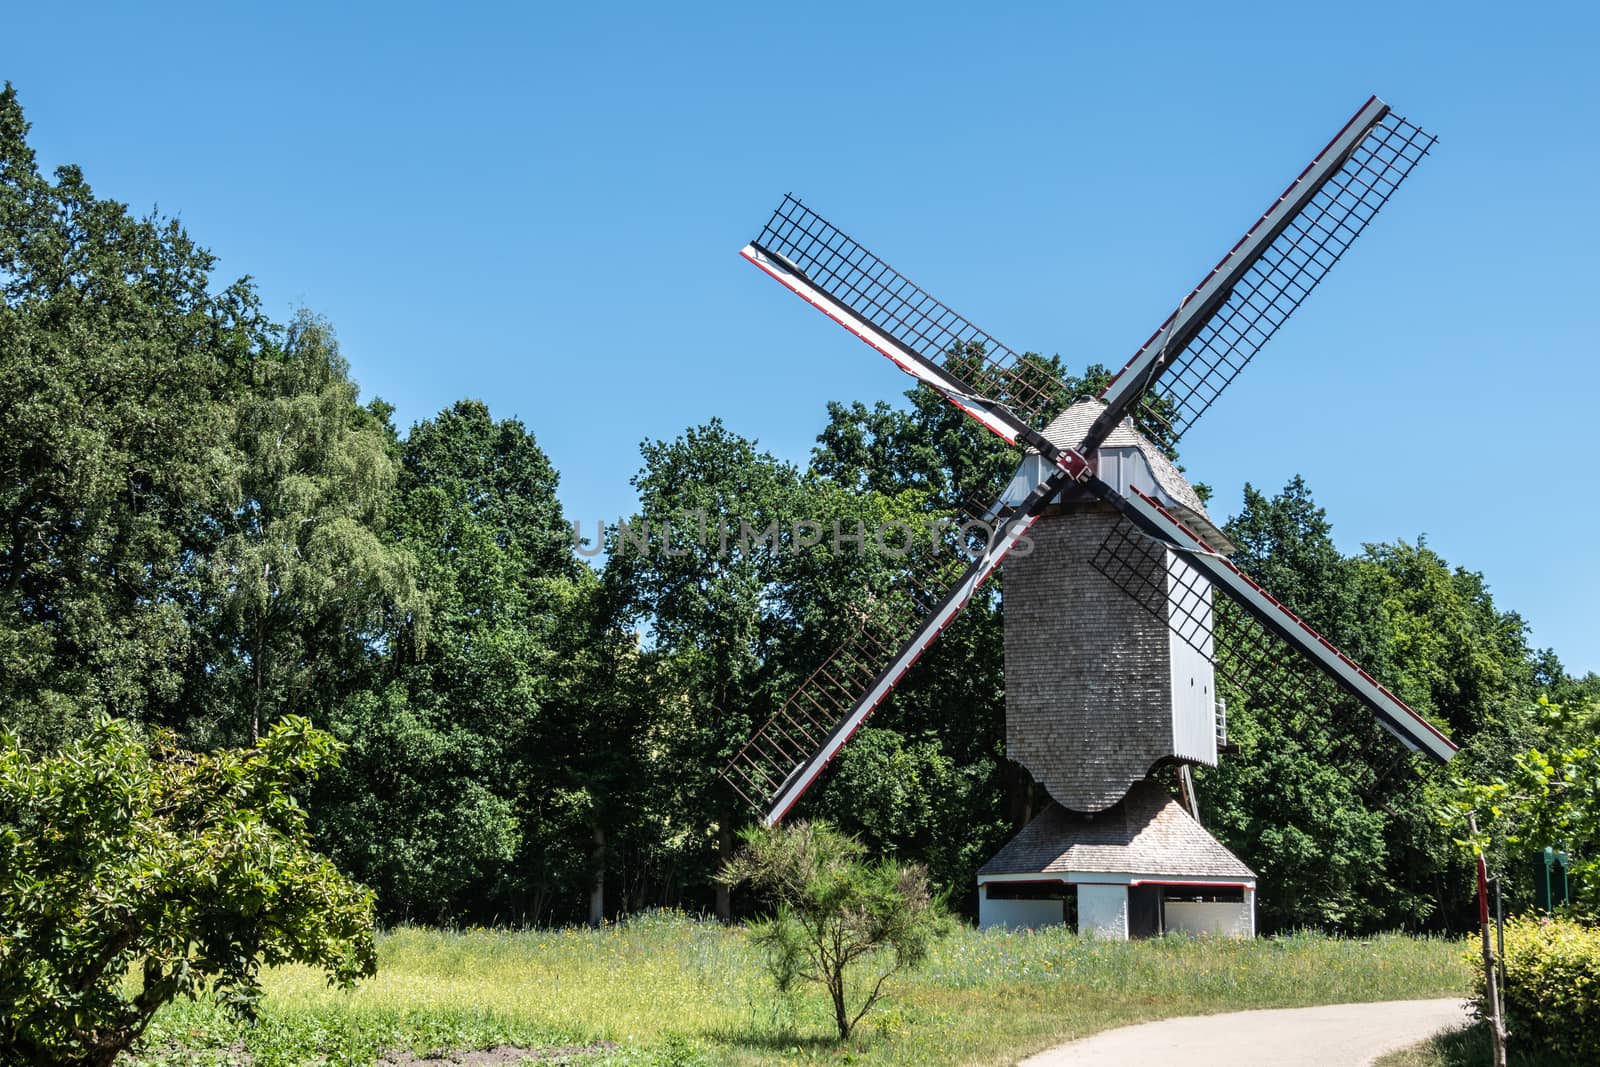 Bokrijk, Belgium - June 27, 2019: Windmill of Schulen is set in green environment of meadow and surrounded by trees under blue sky. No sails on wings.